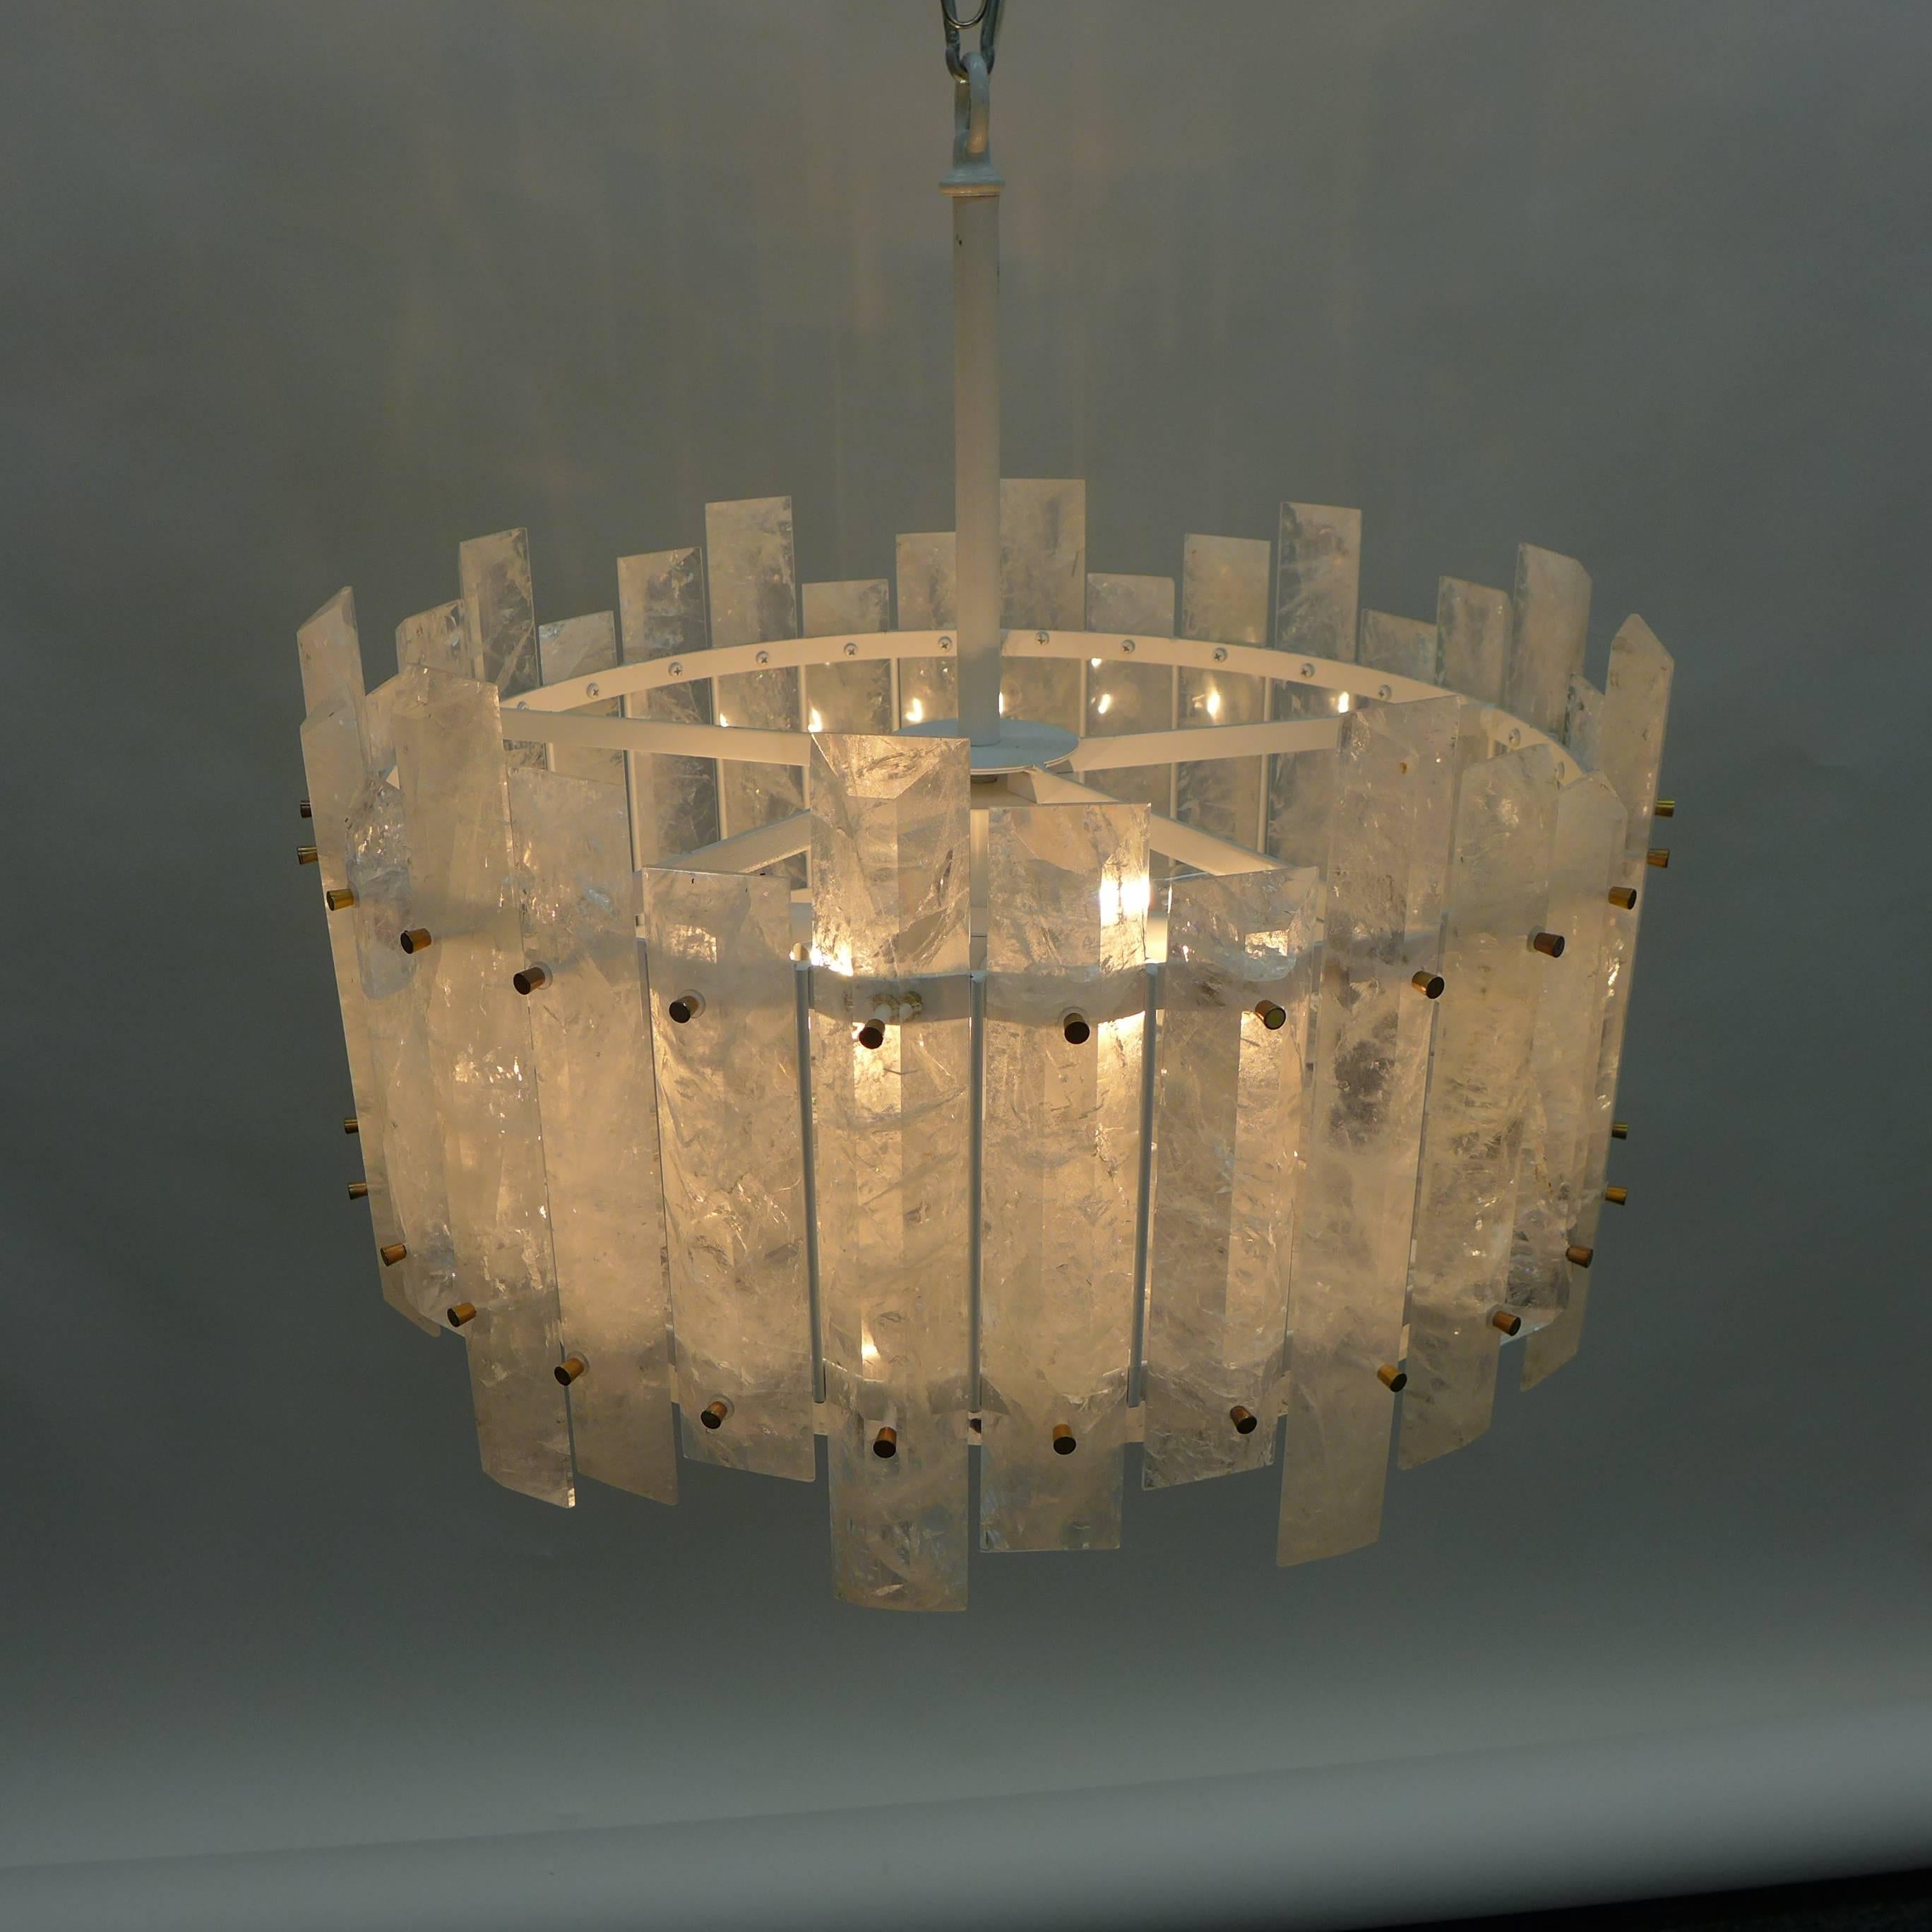 Rock crystal chandelier, round frame composed of beveled rectangular quartz elements interspersing three different sizes. Inner circle containing ten triangular crystals with rounded rock crystal finial at the bottom.